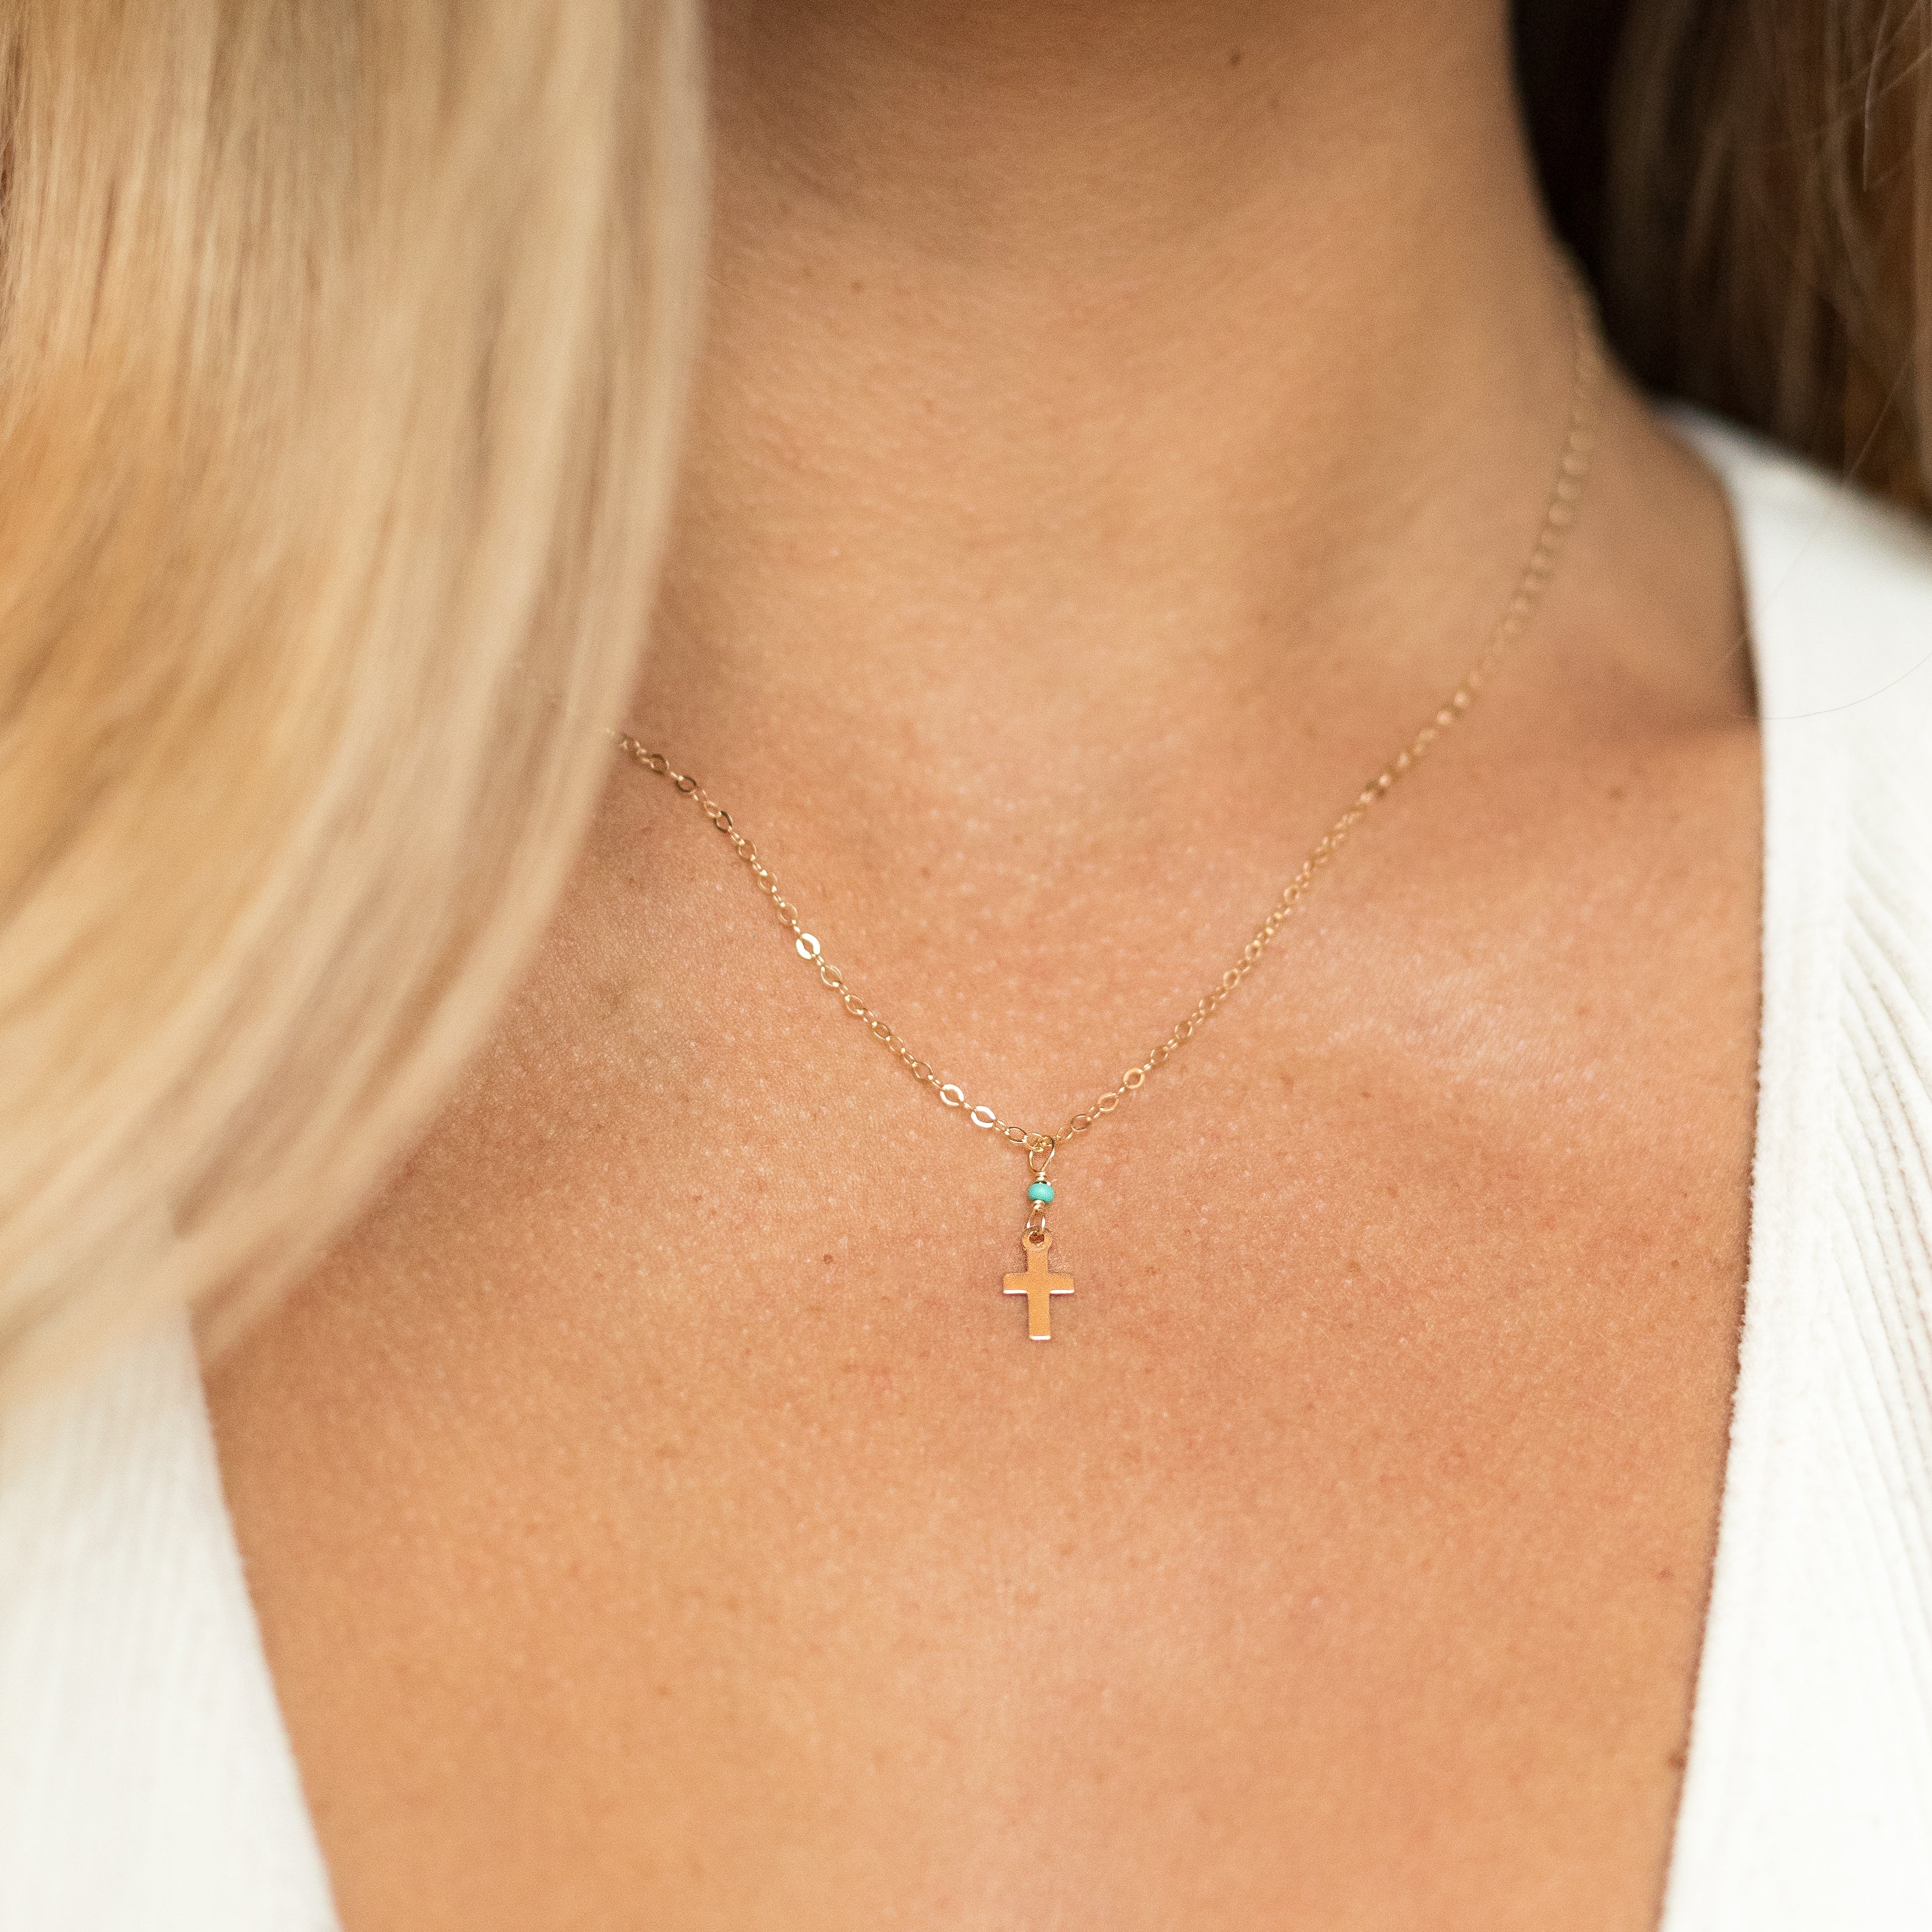 Tiny gold filled cross necklace with a tiny turquoise bead attaching it to a gold chain. Shown on a woman's neck. 